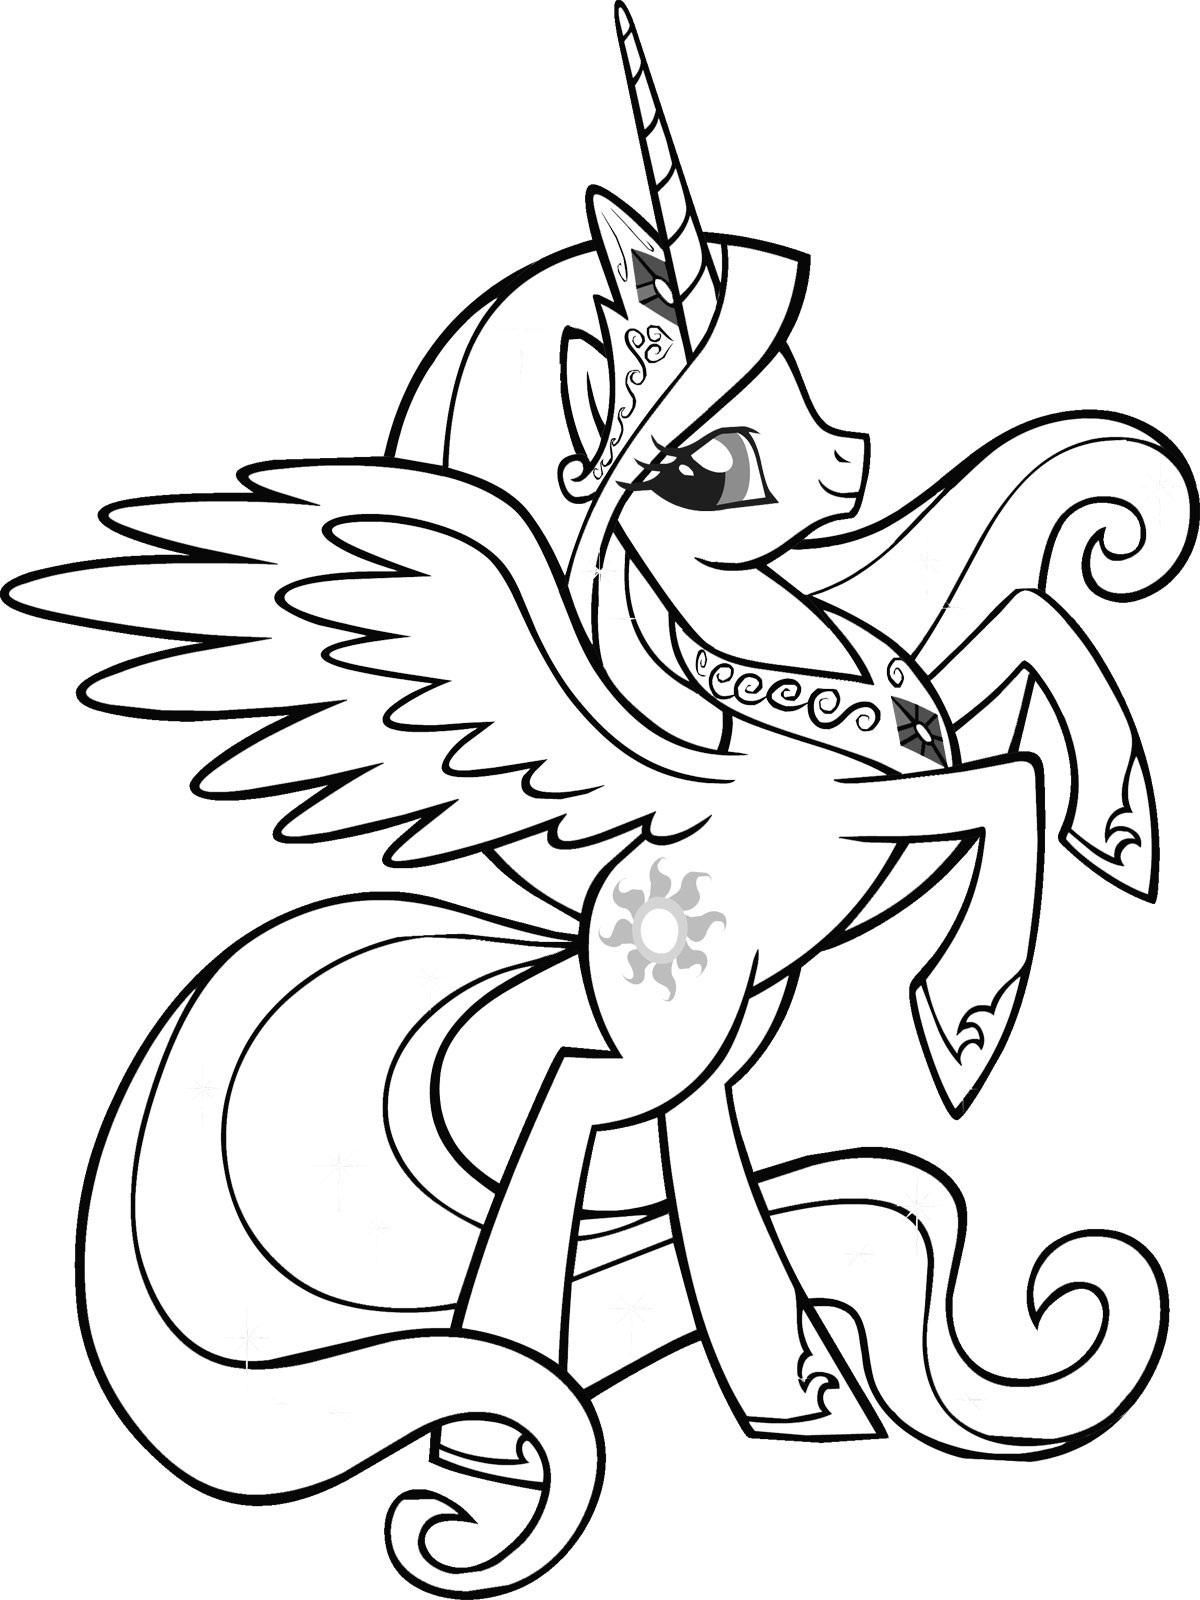 Cool Unicorn Coloring Pages at GetColoringscom Free